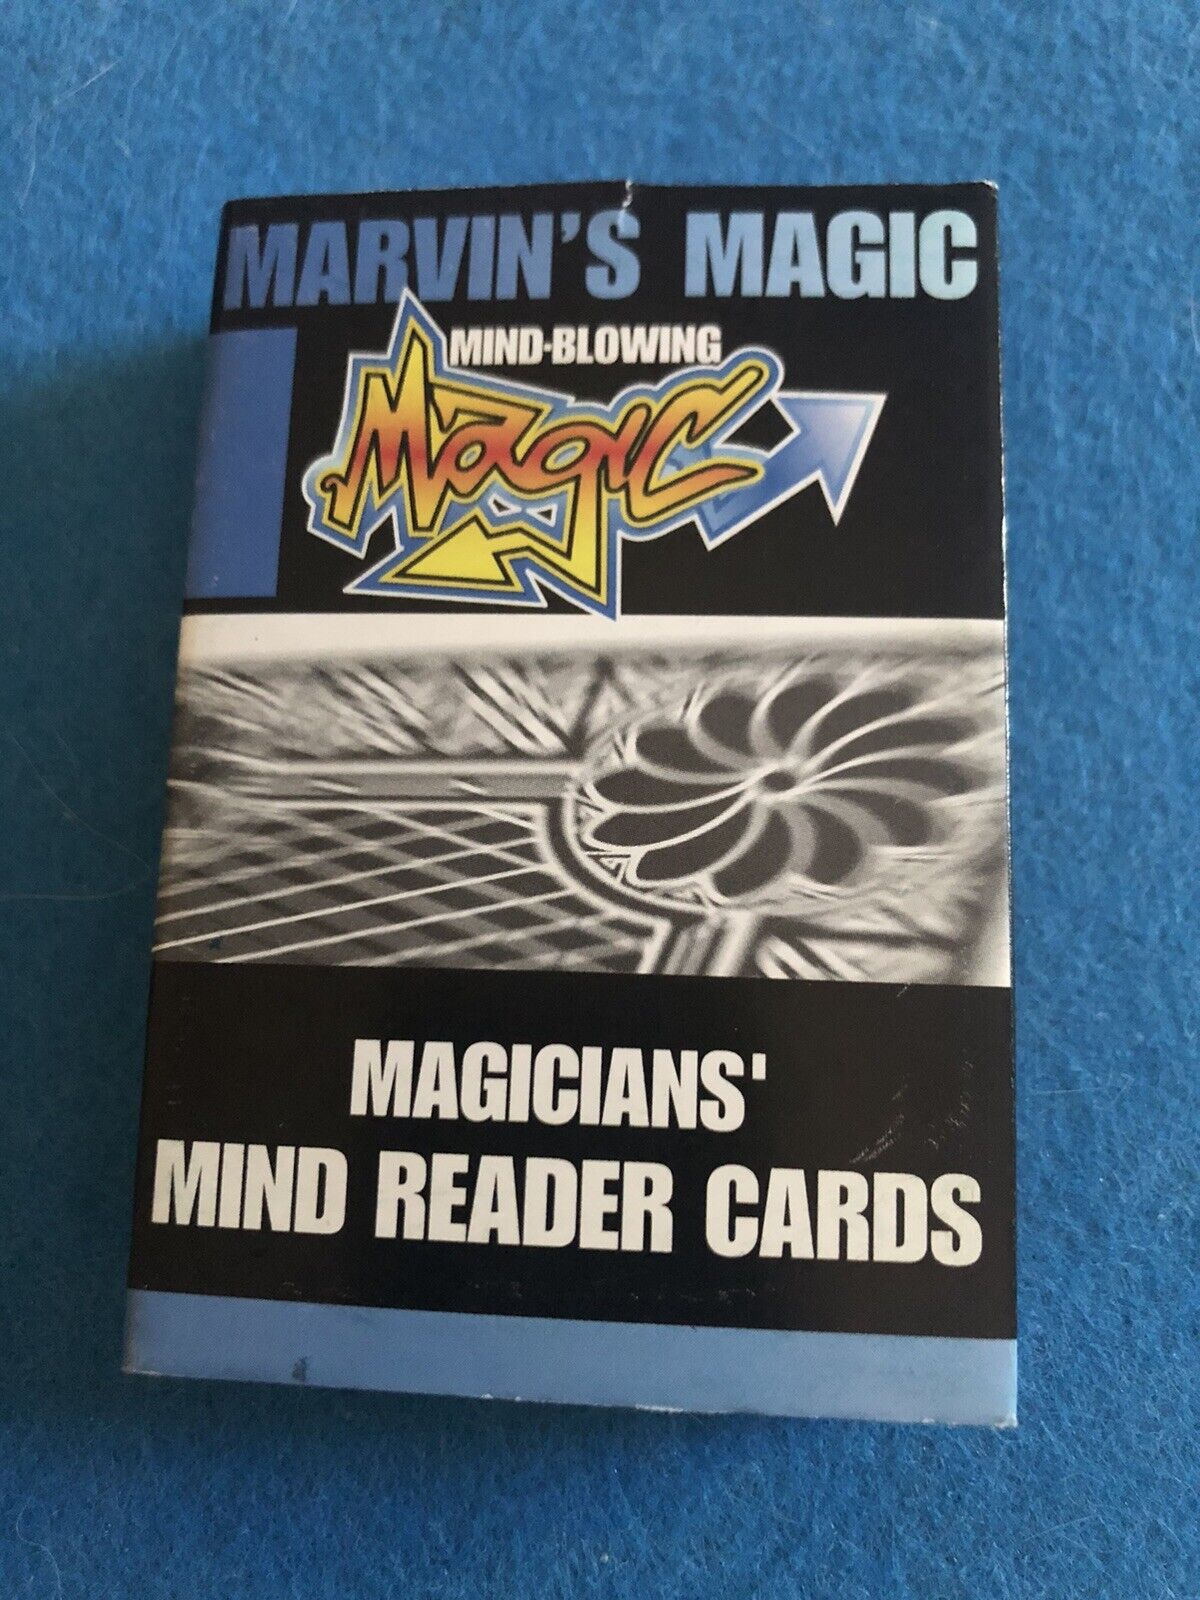 Marvin’s Magic Vintage Magicians Mind Reader Cards - Deck - Rare and New